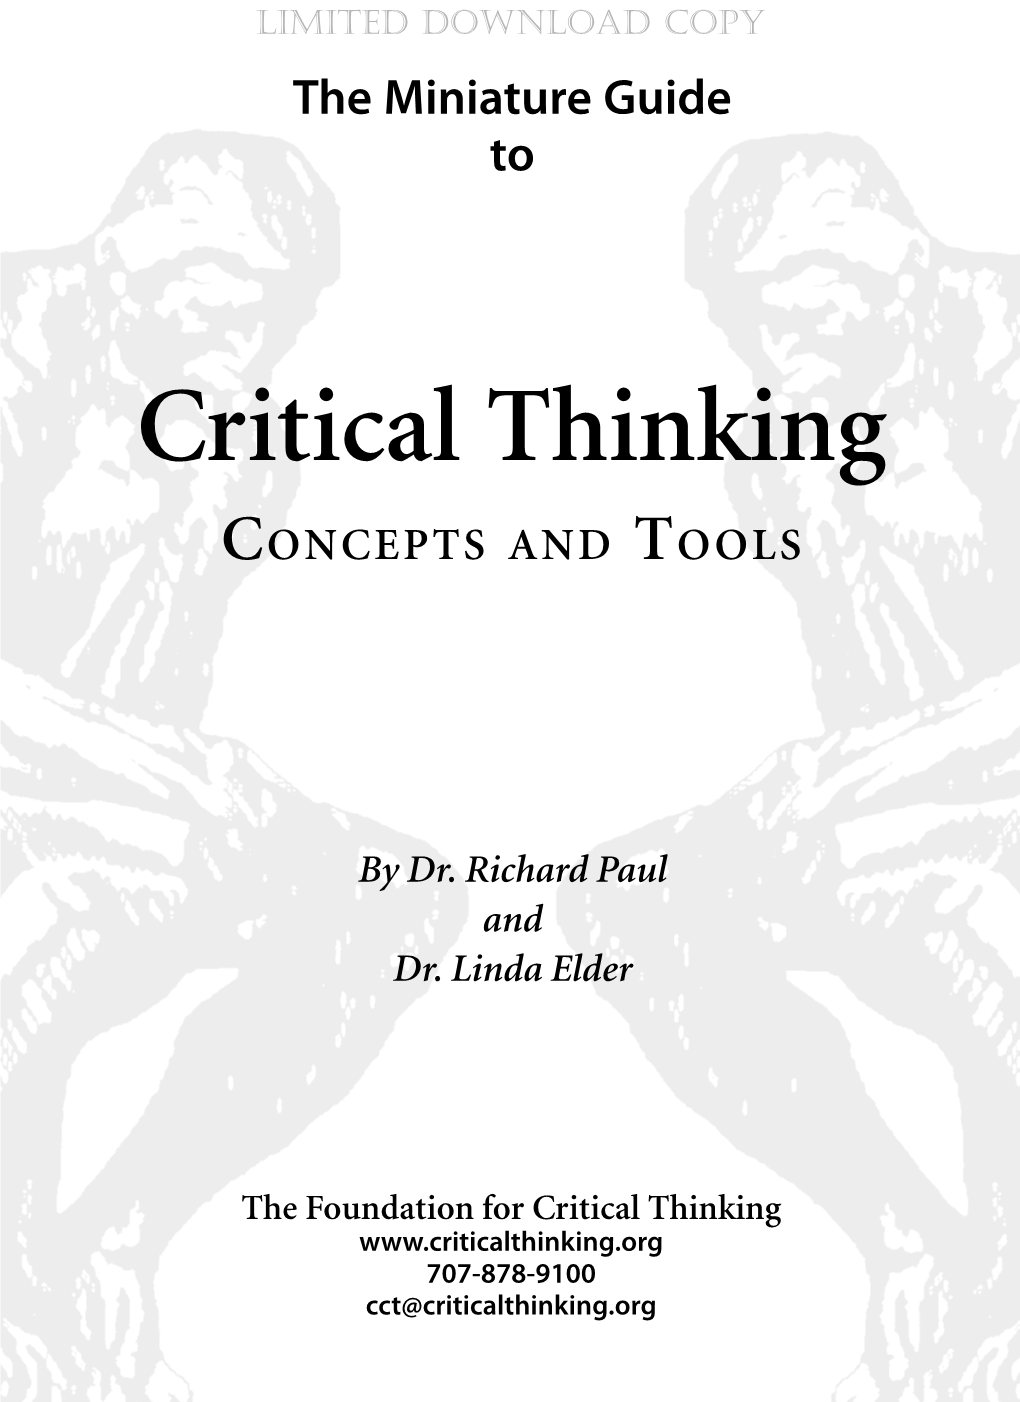 The Miniature Guide to Critical Thinking: Concepts & Tools